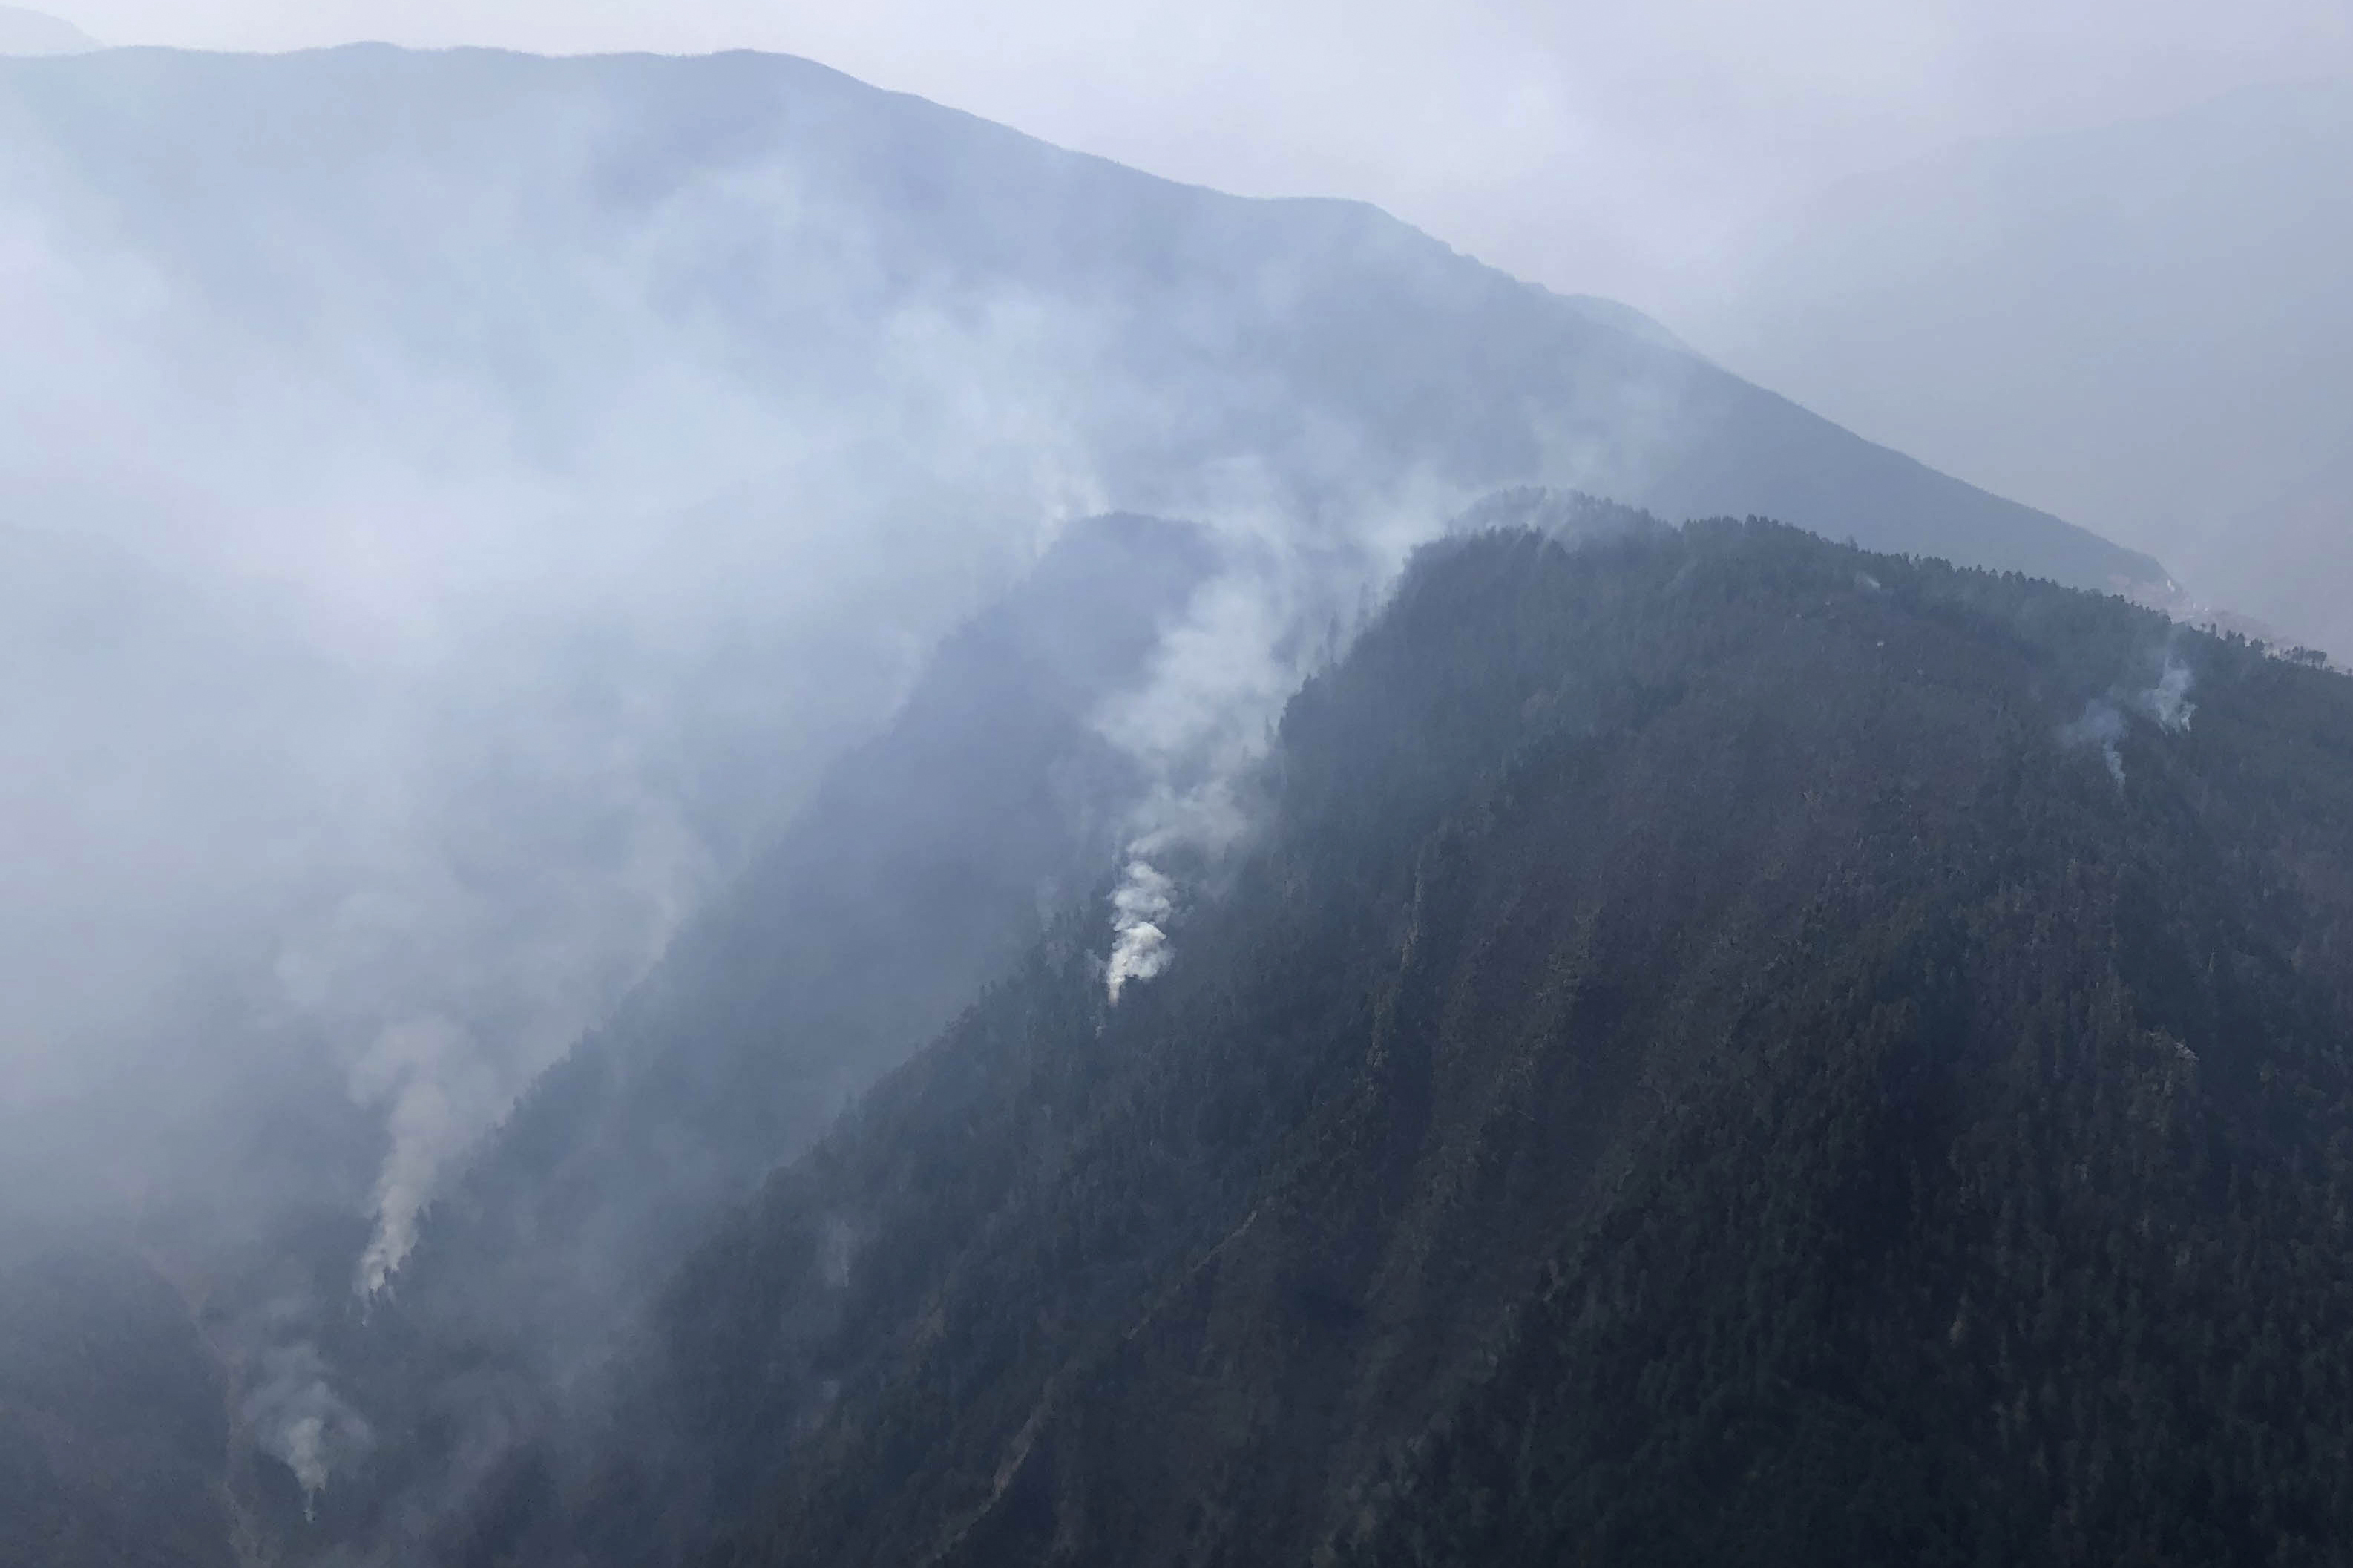 Firefighters contain fire in China's mountains where 30 died